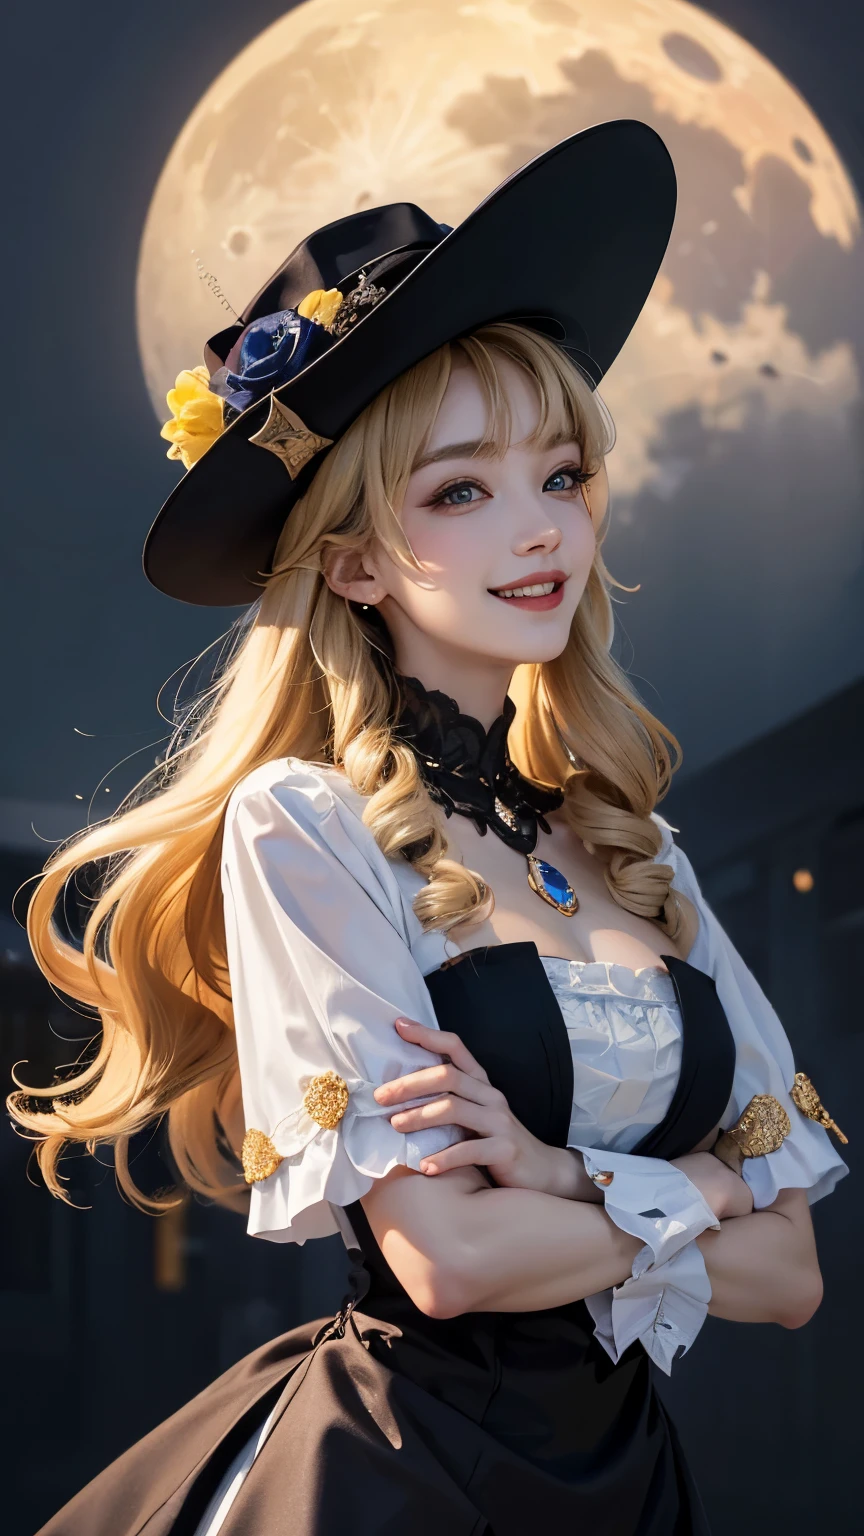 moon background，maid outfit, black and white art, His style, hunter's eyes, masterpiece, best quality，blonde hair, blue eyes，sparkle in eyes，long golden hair，huge ，Nice hat，mischievous laugh